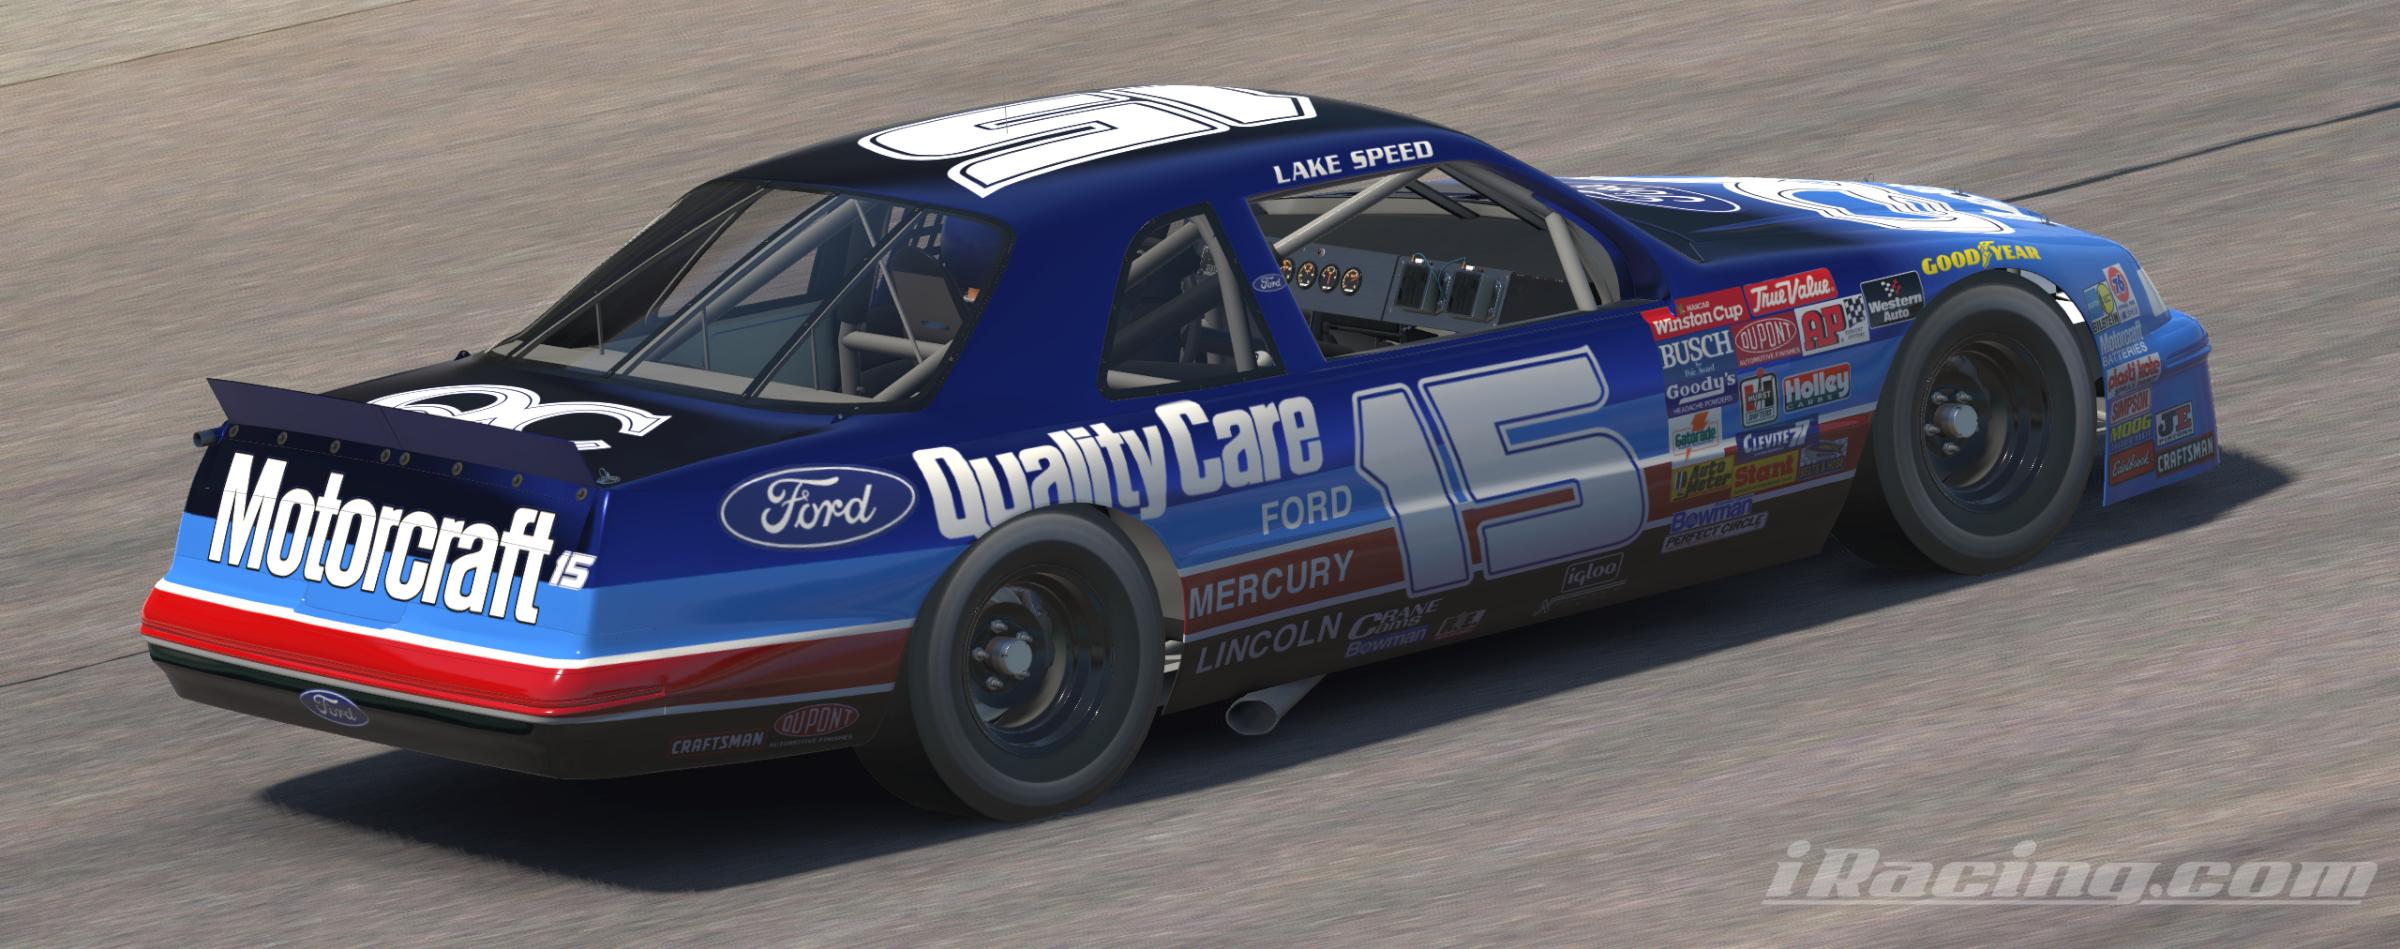 Preview of 1994 #15 Lake Speed Quality Care Ford - Winston Cup by William Goshen